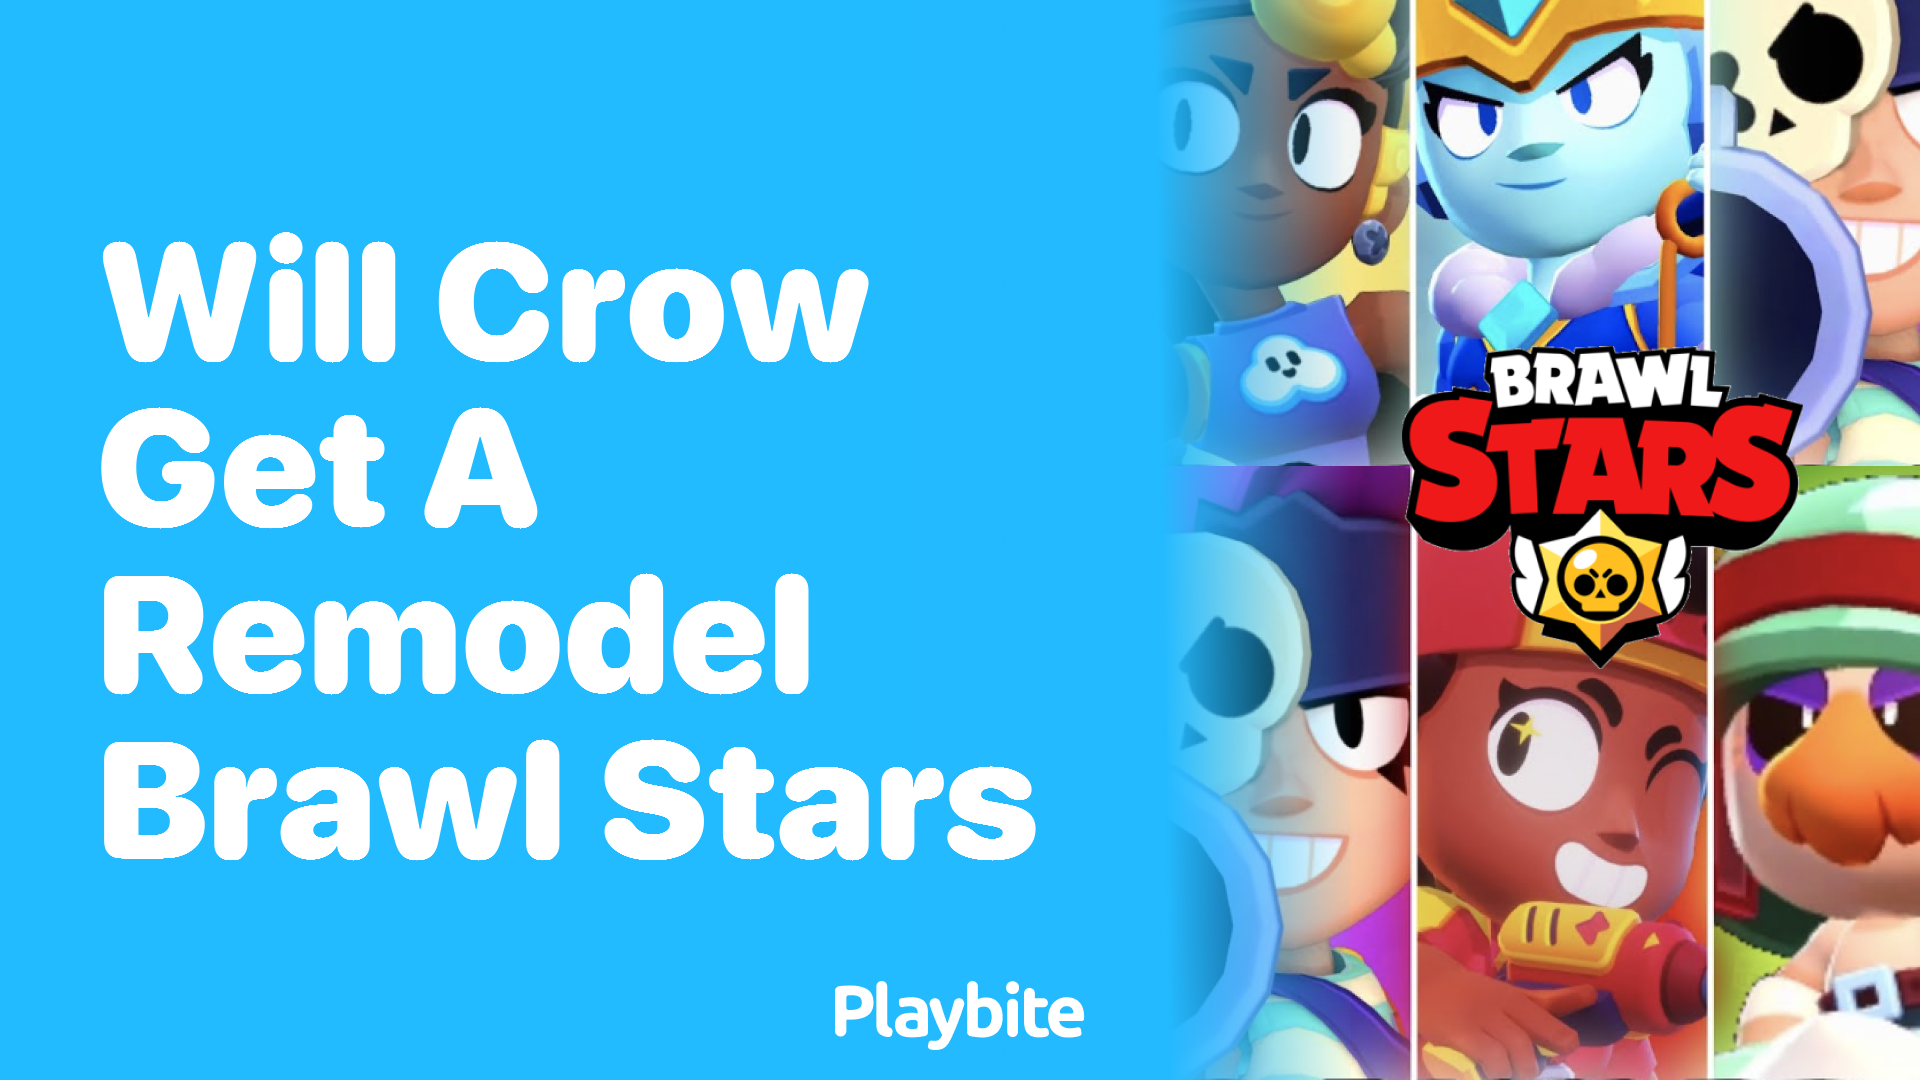 Will Crow Get a Remodel in Brawl Stars? Unveiling the Mystery